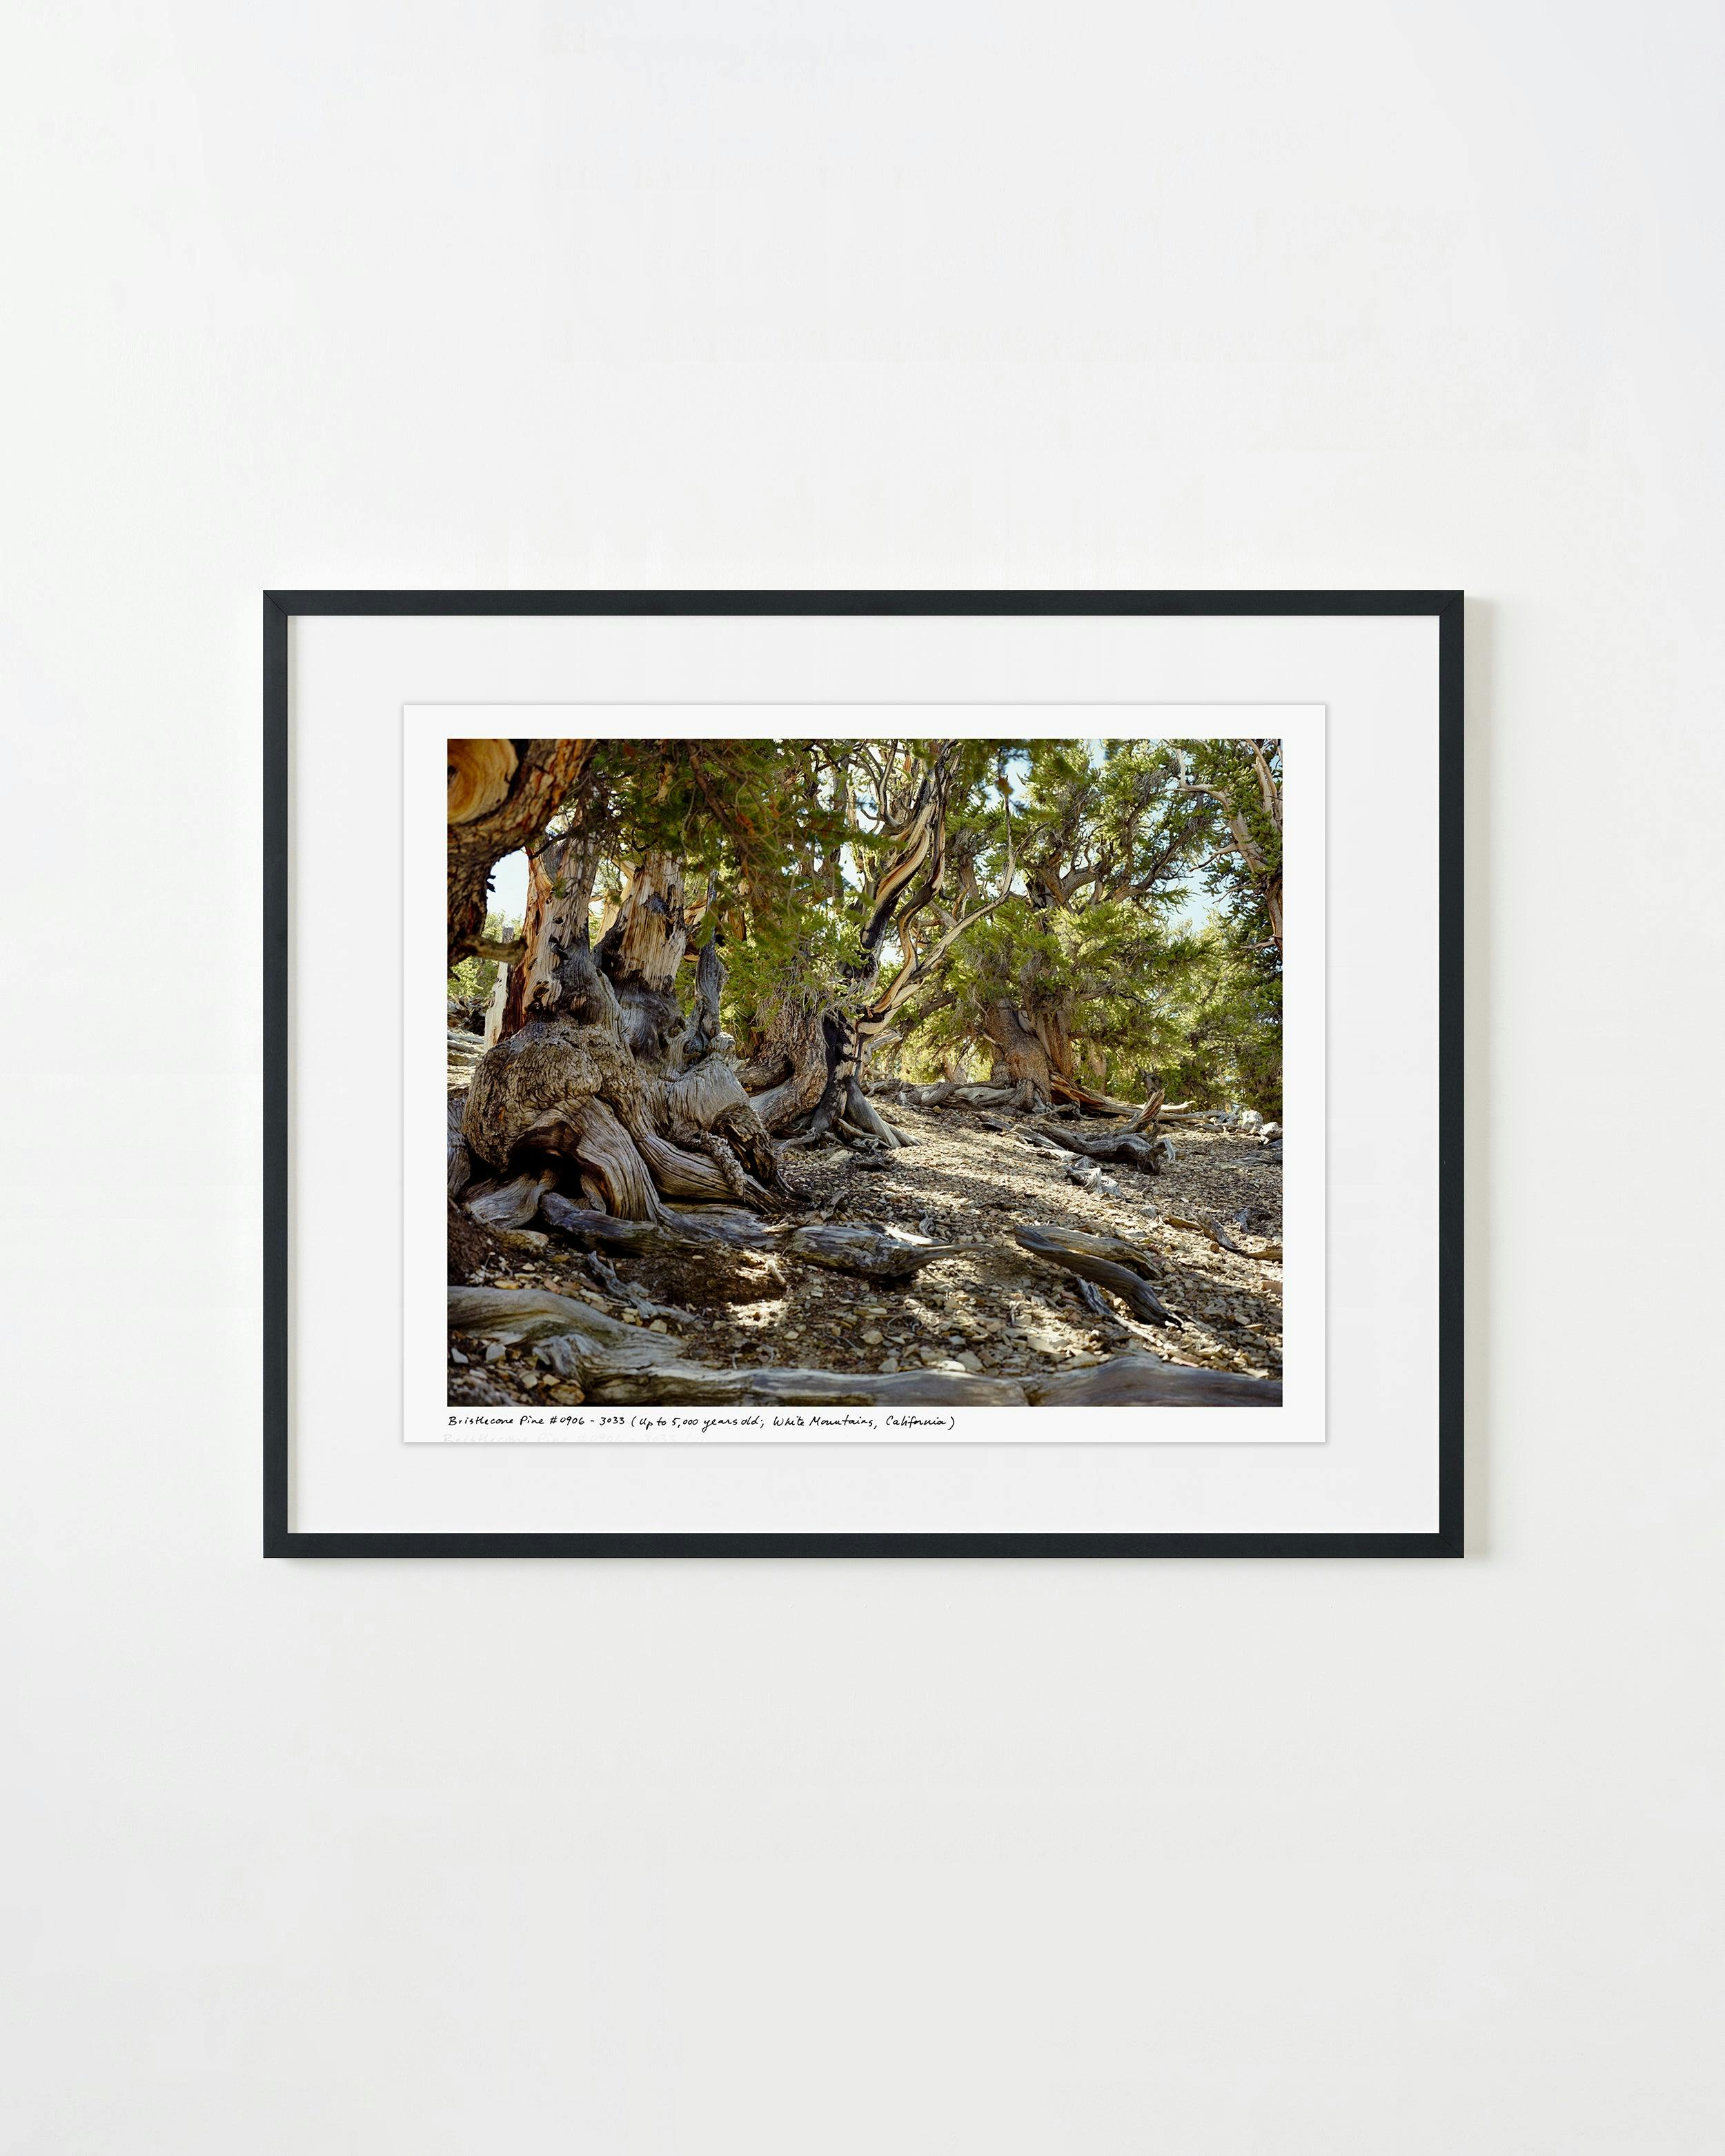 Photography by Rachel Sussman titled "Bristlecone Pine #0906-3033 (Up to 5,000 years old; White Mountains, California)".